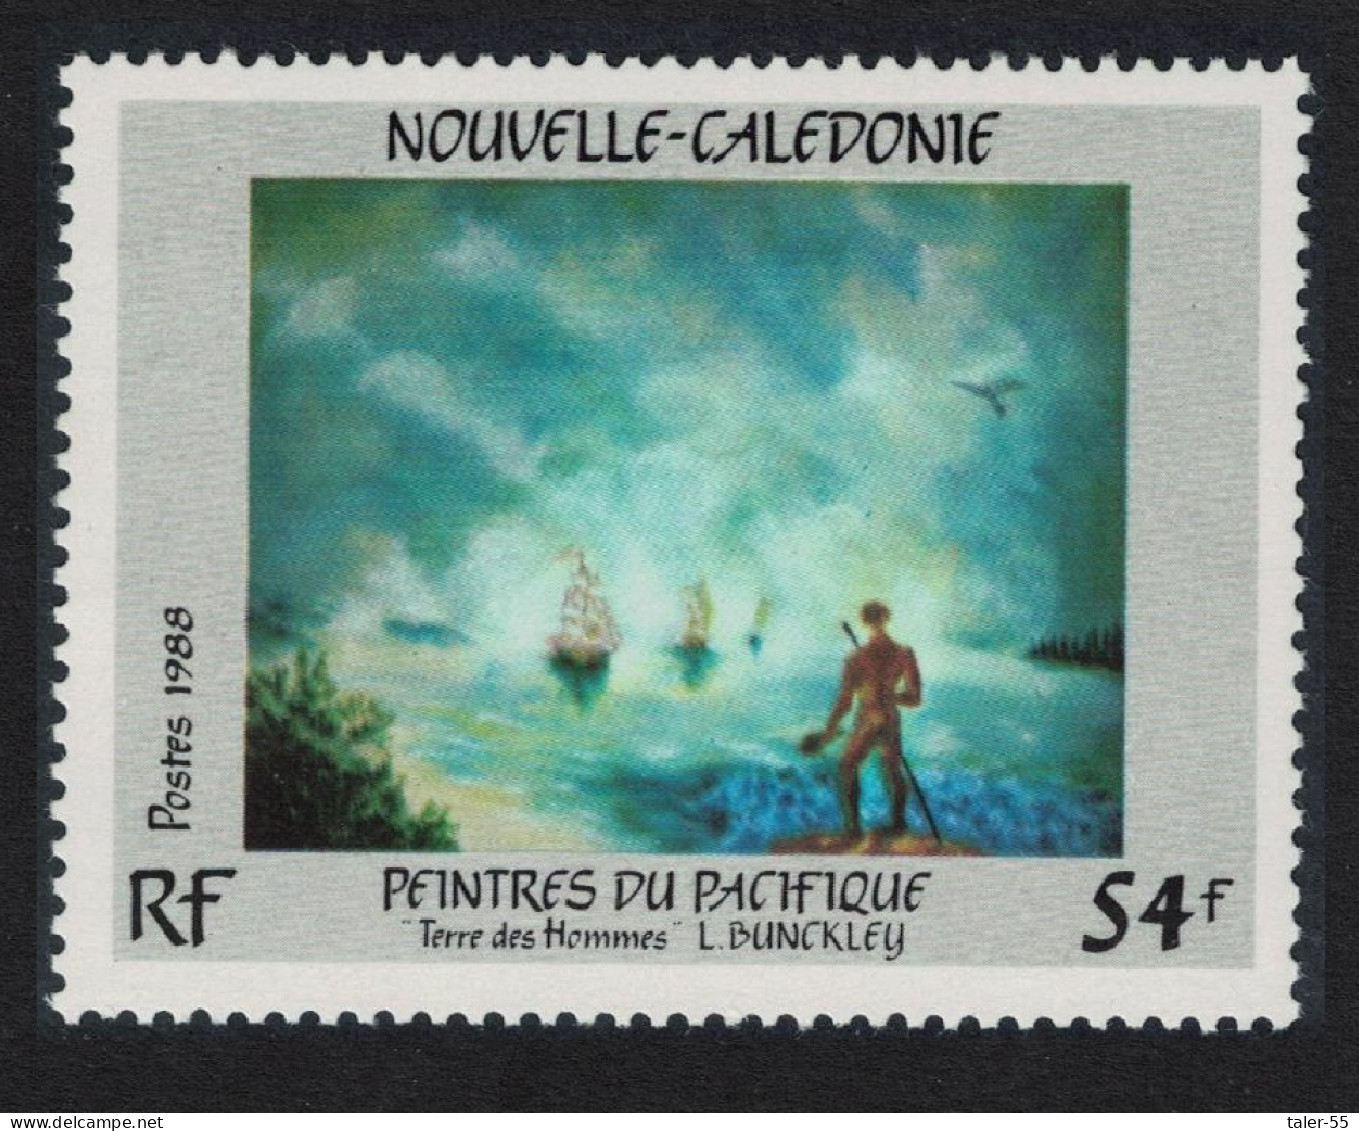 New Caledonia 'Terre Des Hommes' Painting By L. Bunckley 1988 MNH SG#852 - Neufs